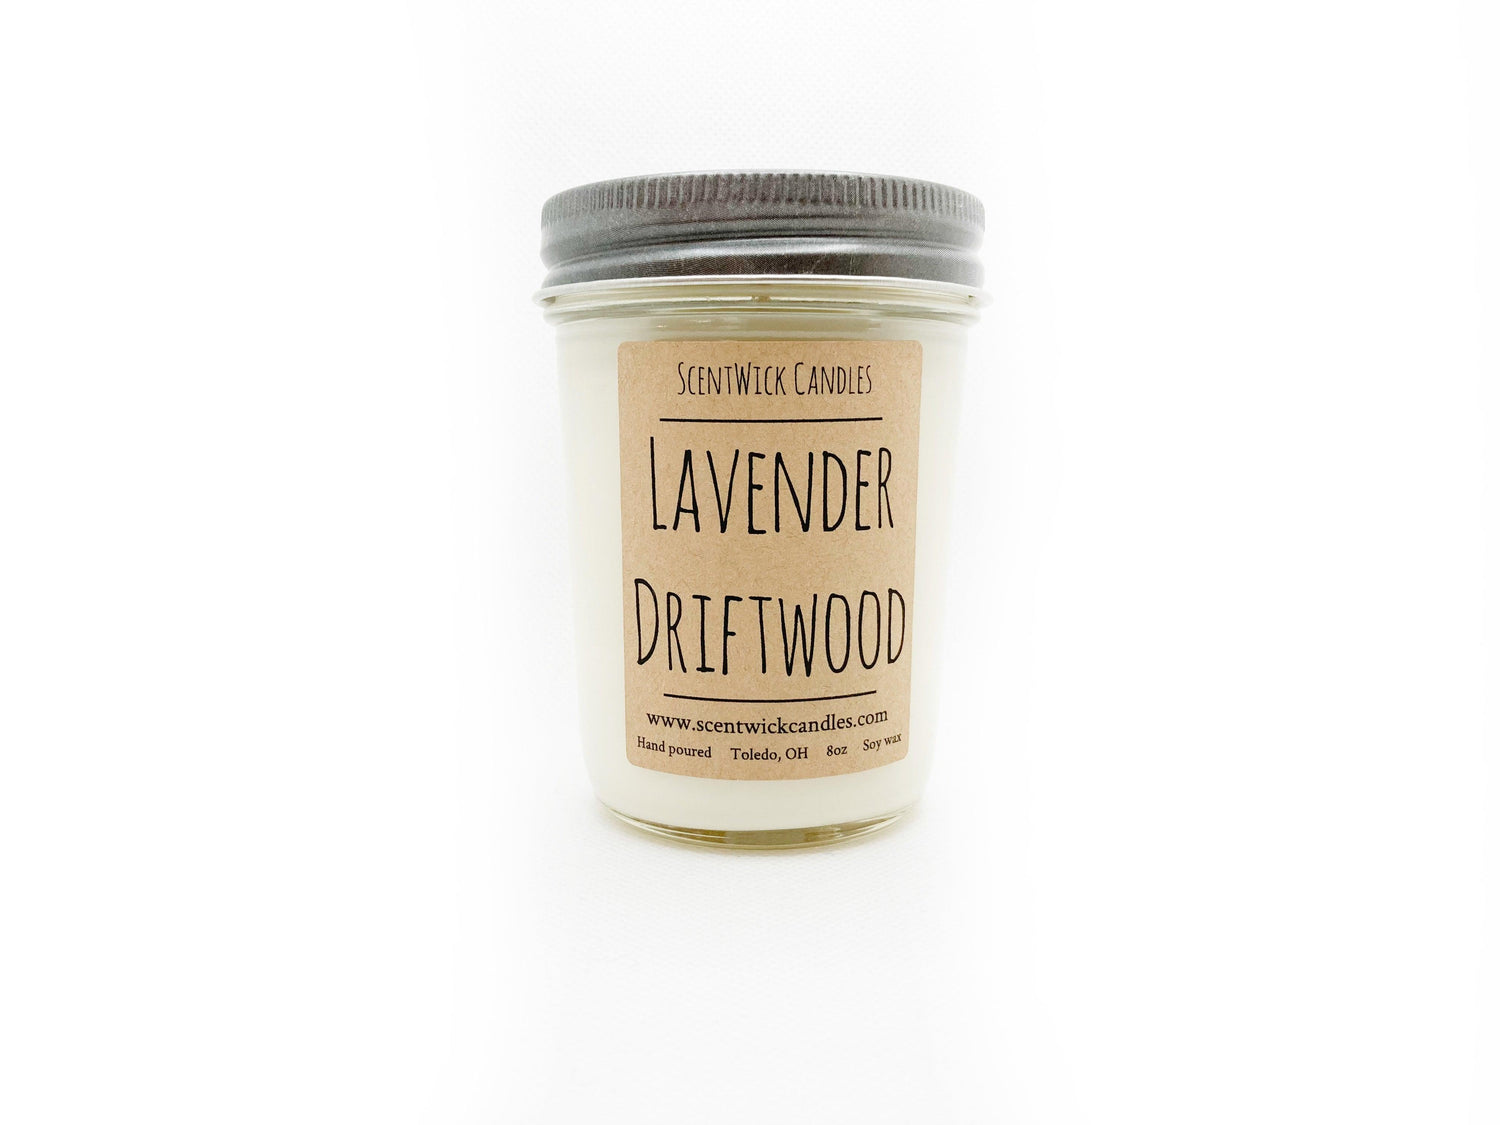 Lavender Driftwood - ScentWick Candles